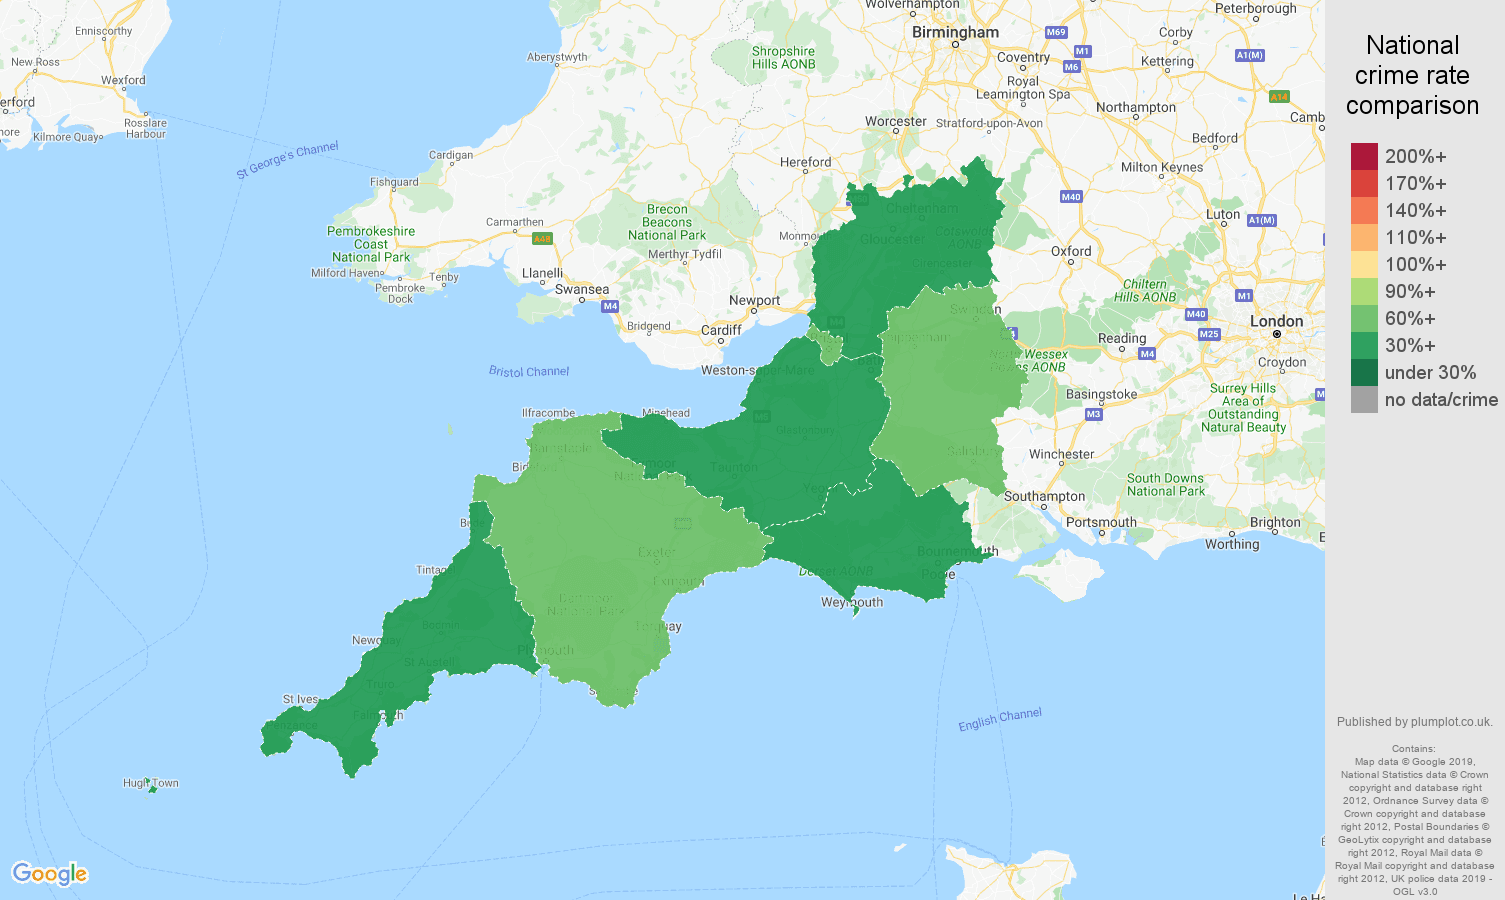 South West possession of weapons crime rate comparison map